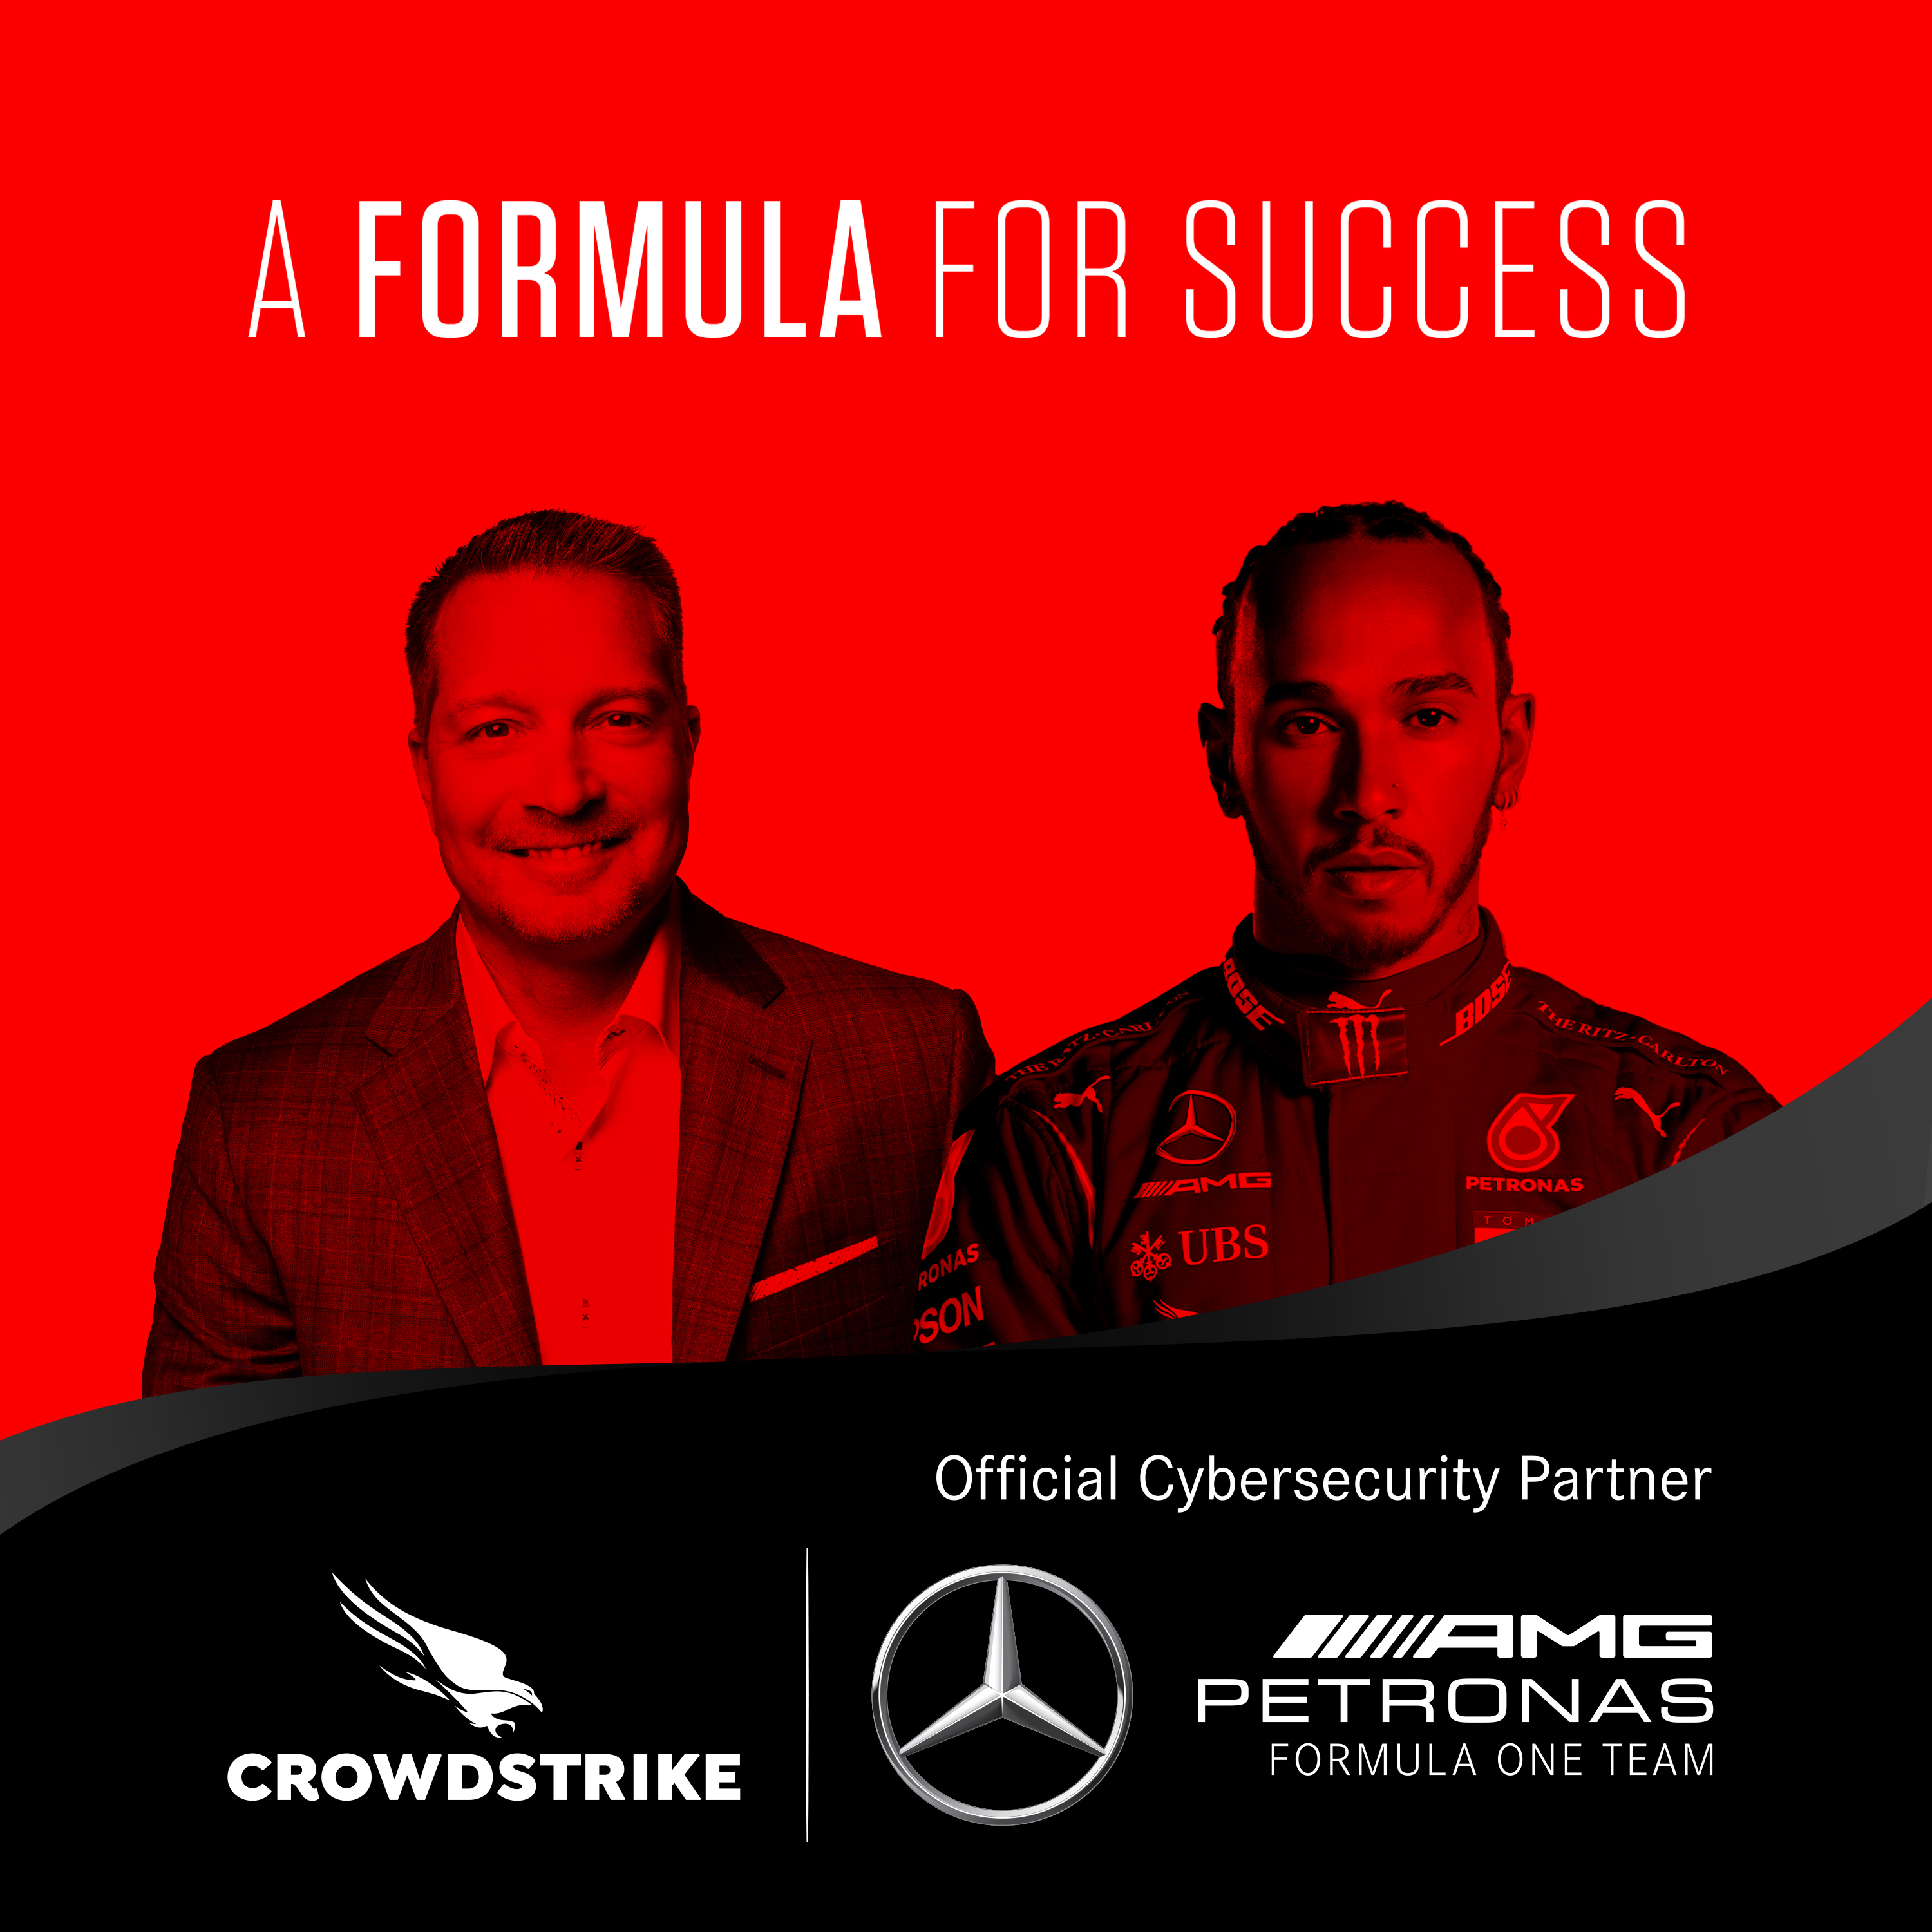 Performance under Pressure: Lewis Hamilton, 7-time FIA Formula One™ World Drivers Champion in a conversation with George Kurtz, CrowdStrike CEO and co-founder